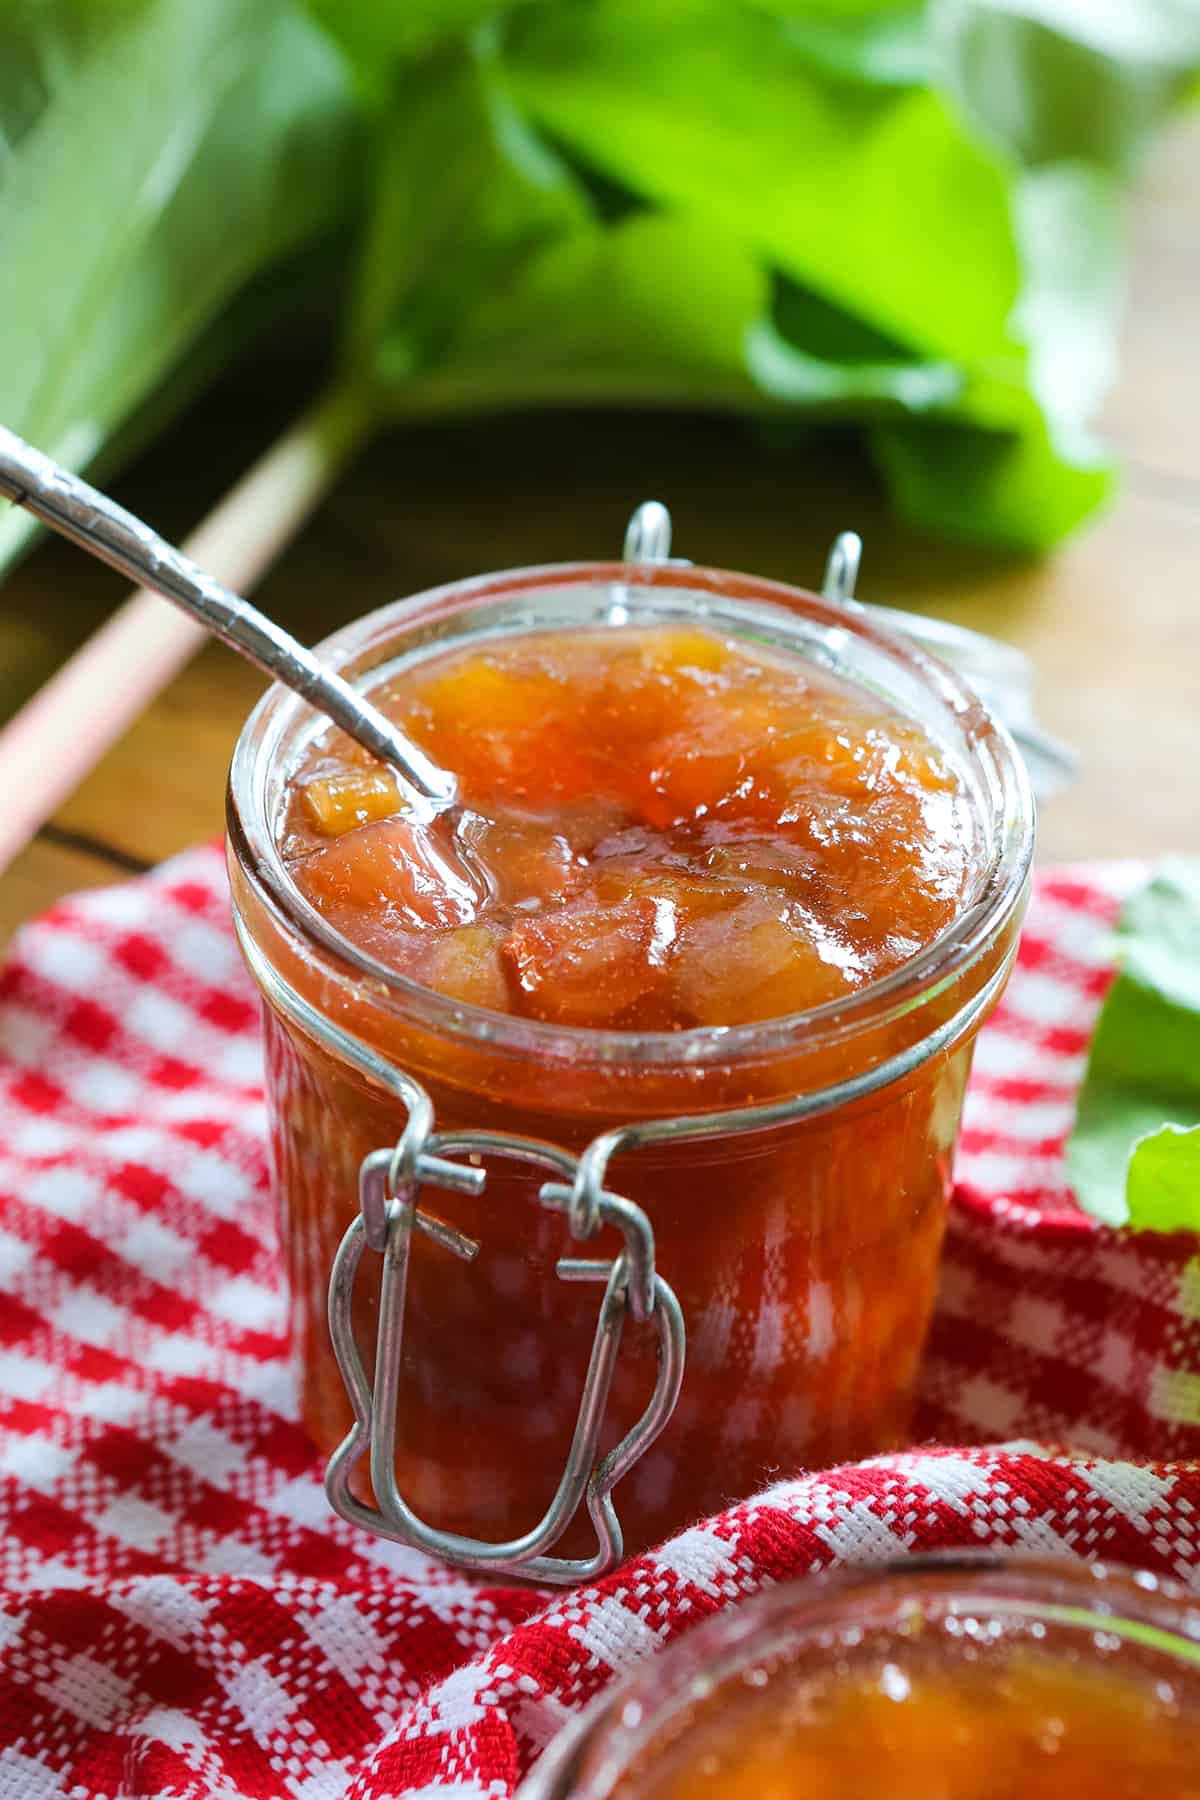 Spoon sticking out of a mason jar filled with jam.